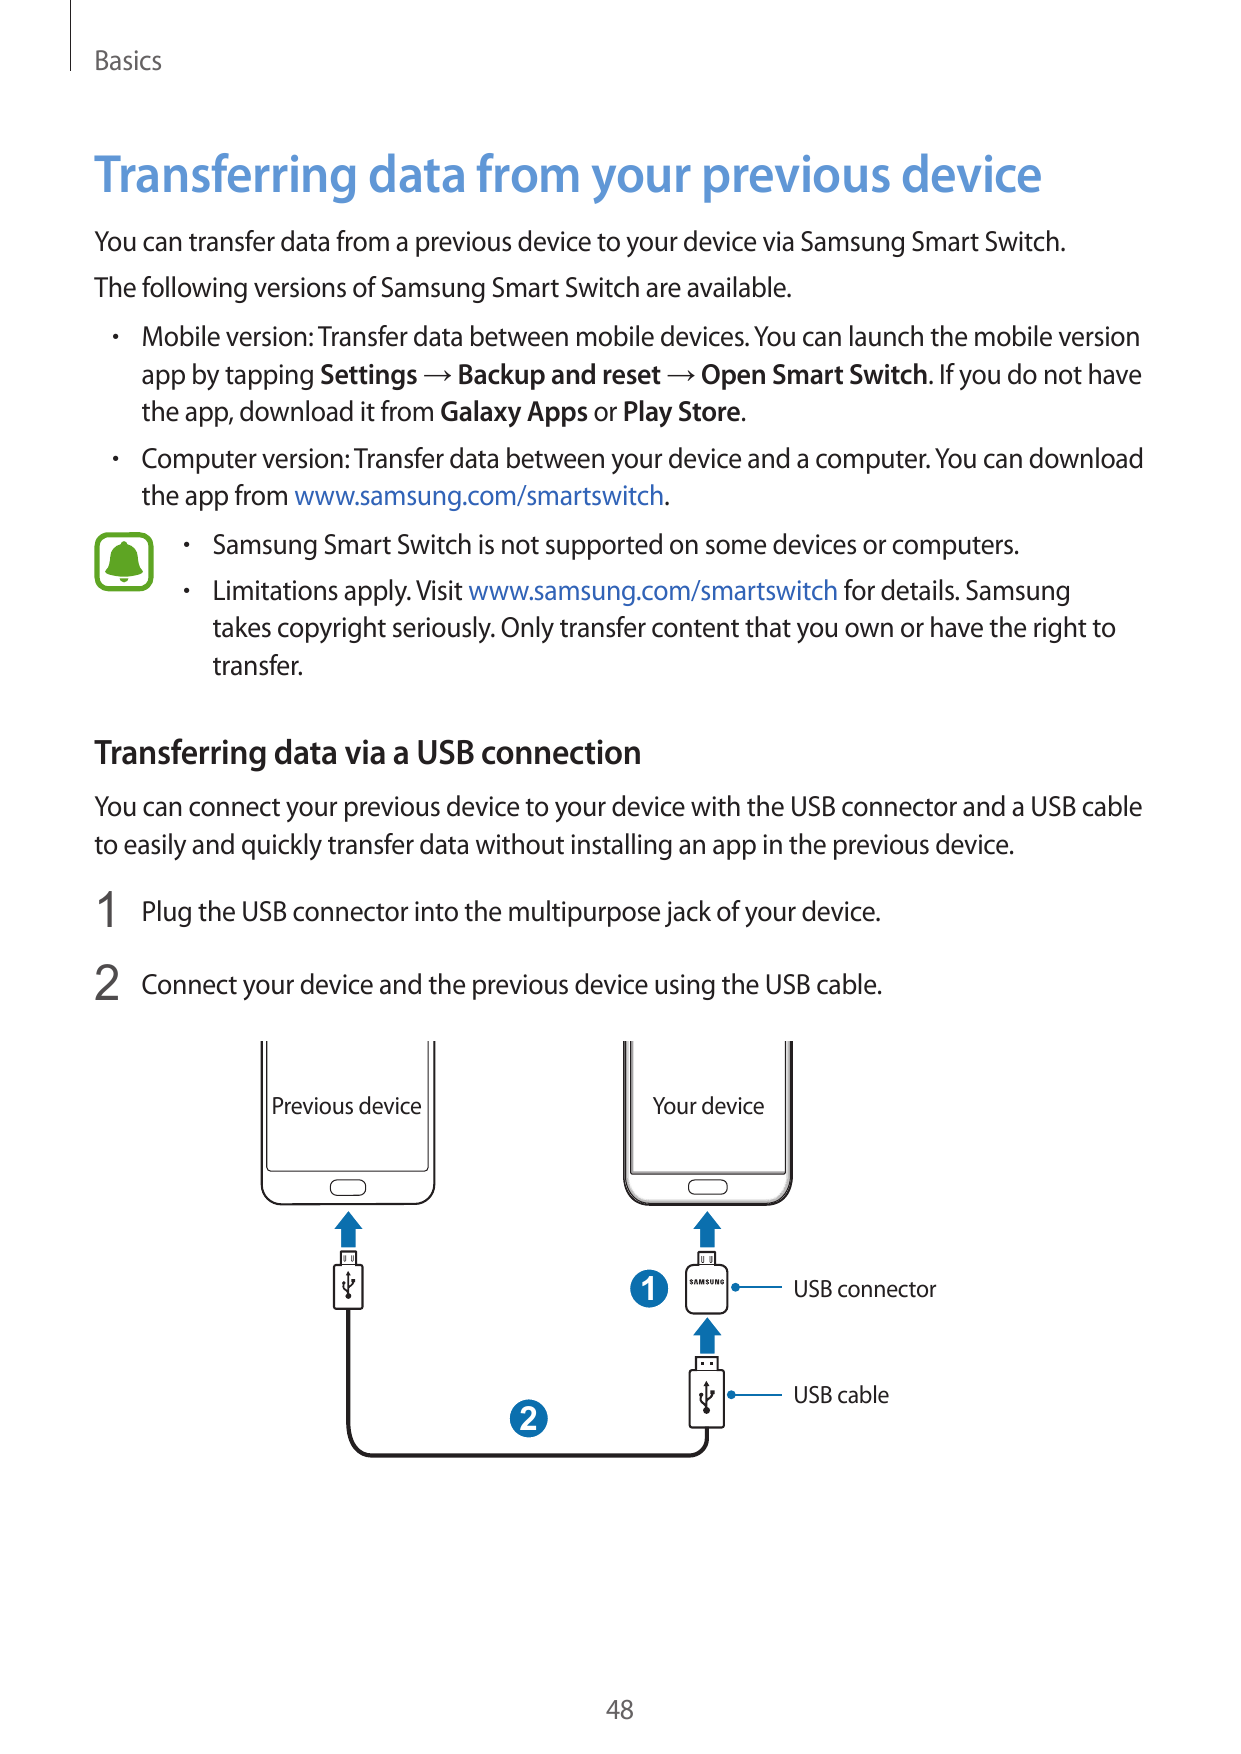 BasicsTransferring data from your previous deviceYou can transfer data from a previous device to your device via Samsung Smart S